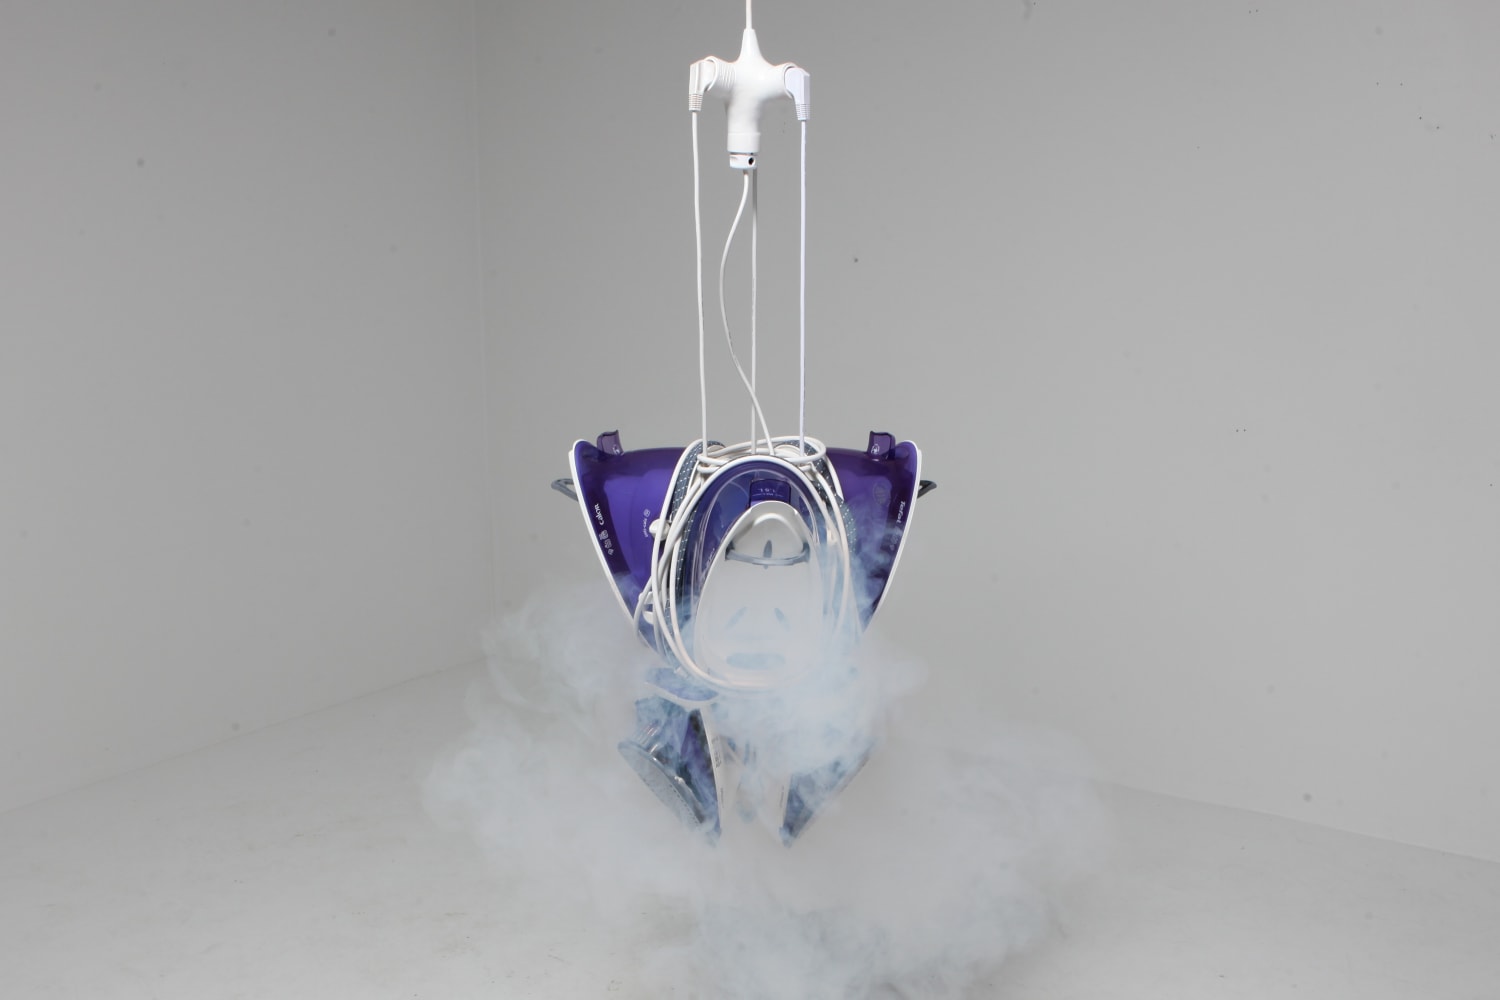 Theo Demans Calor calor tela efectos , 2019 ironing stations, fog machine, wires 50 x 50 x 70 Copyright The...